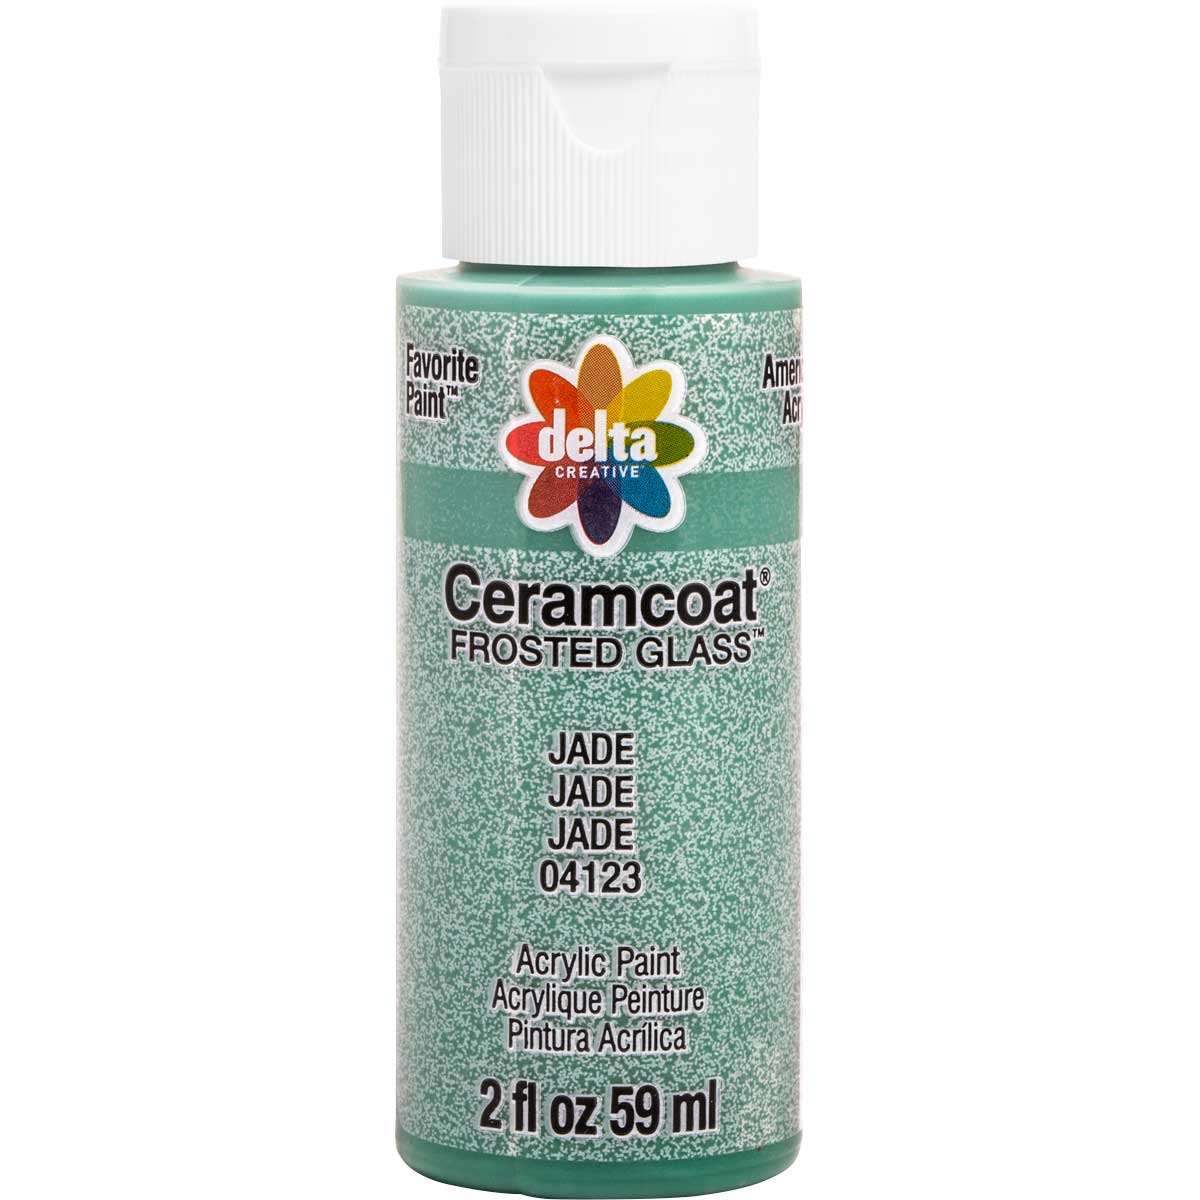 Delta Ceramcoat ® Frosted Glass Paint - Jade, 2 oz. - 04123